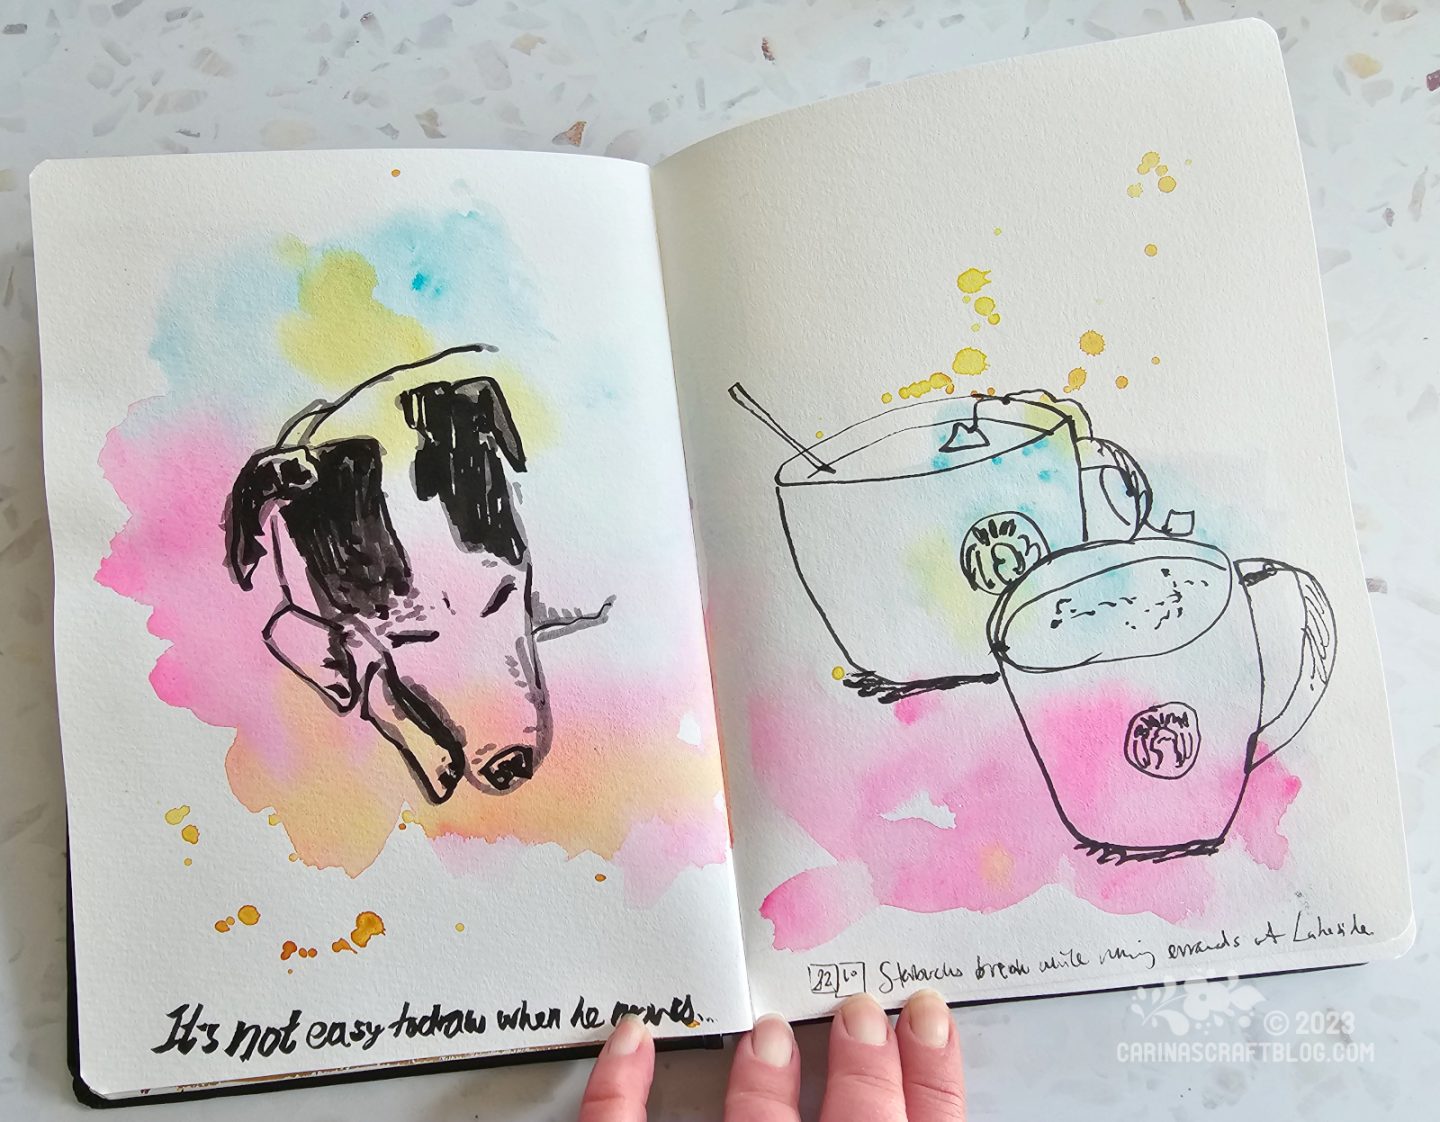 Photo of an open spread in a sketchbook. The spread shows a sketch of a sleeping dog on the left page and two mugs on the right page, both sketches drawn over pink, yellow and blue watercolour splashes.